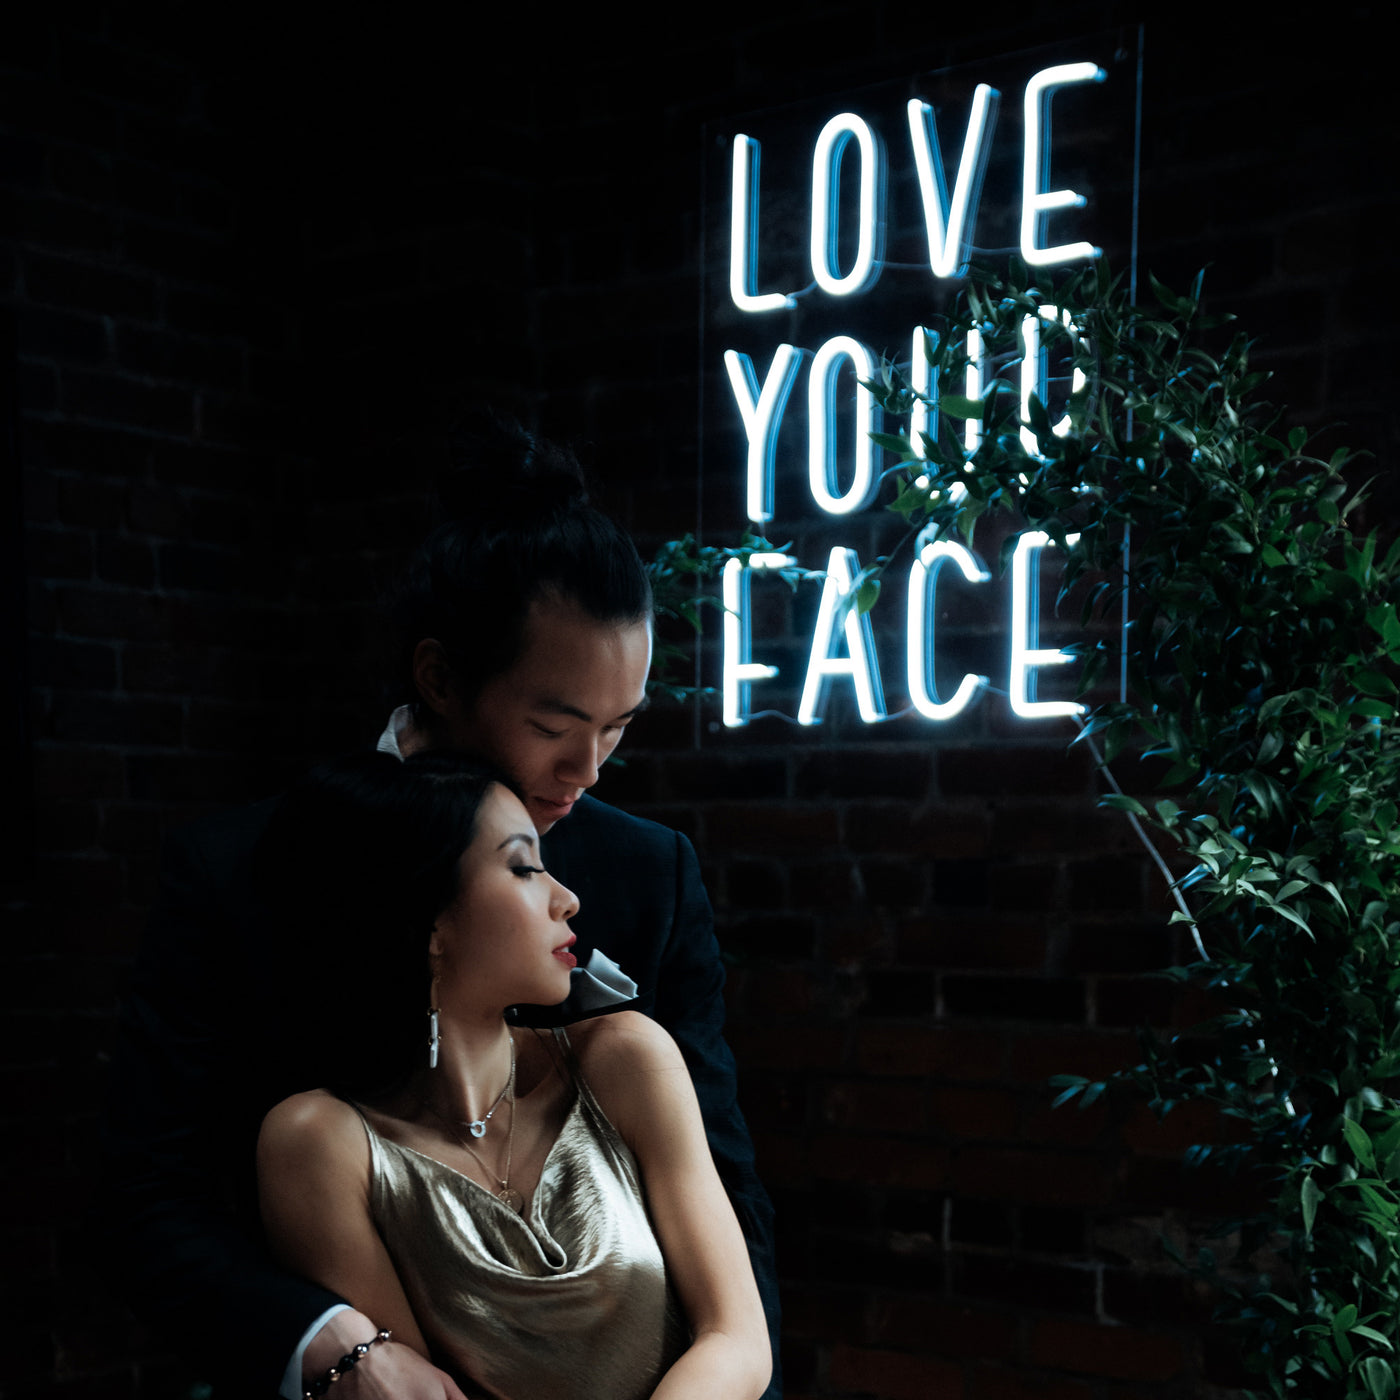 "LOVE YOUR FACE"